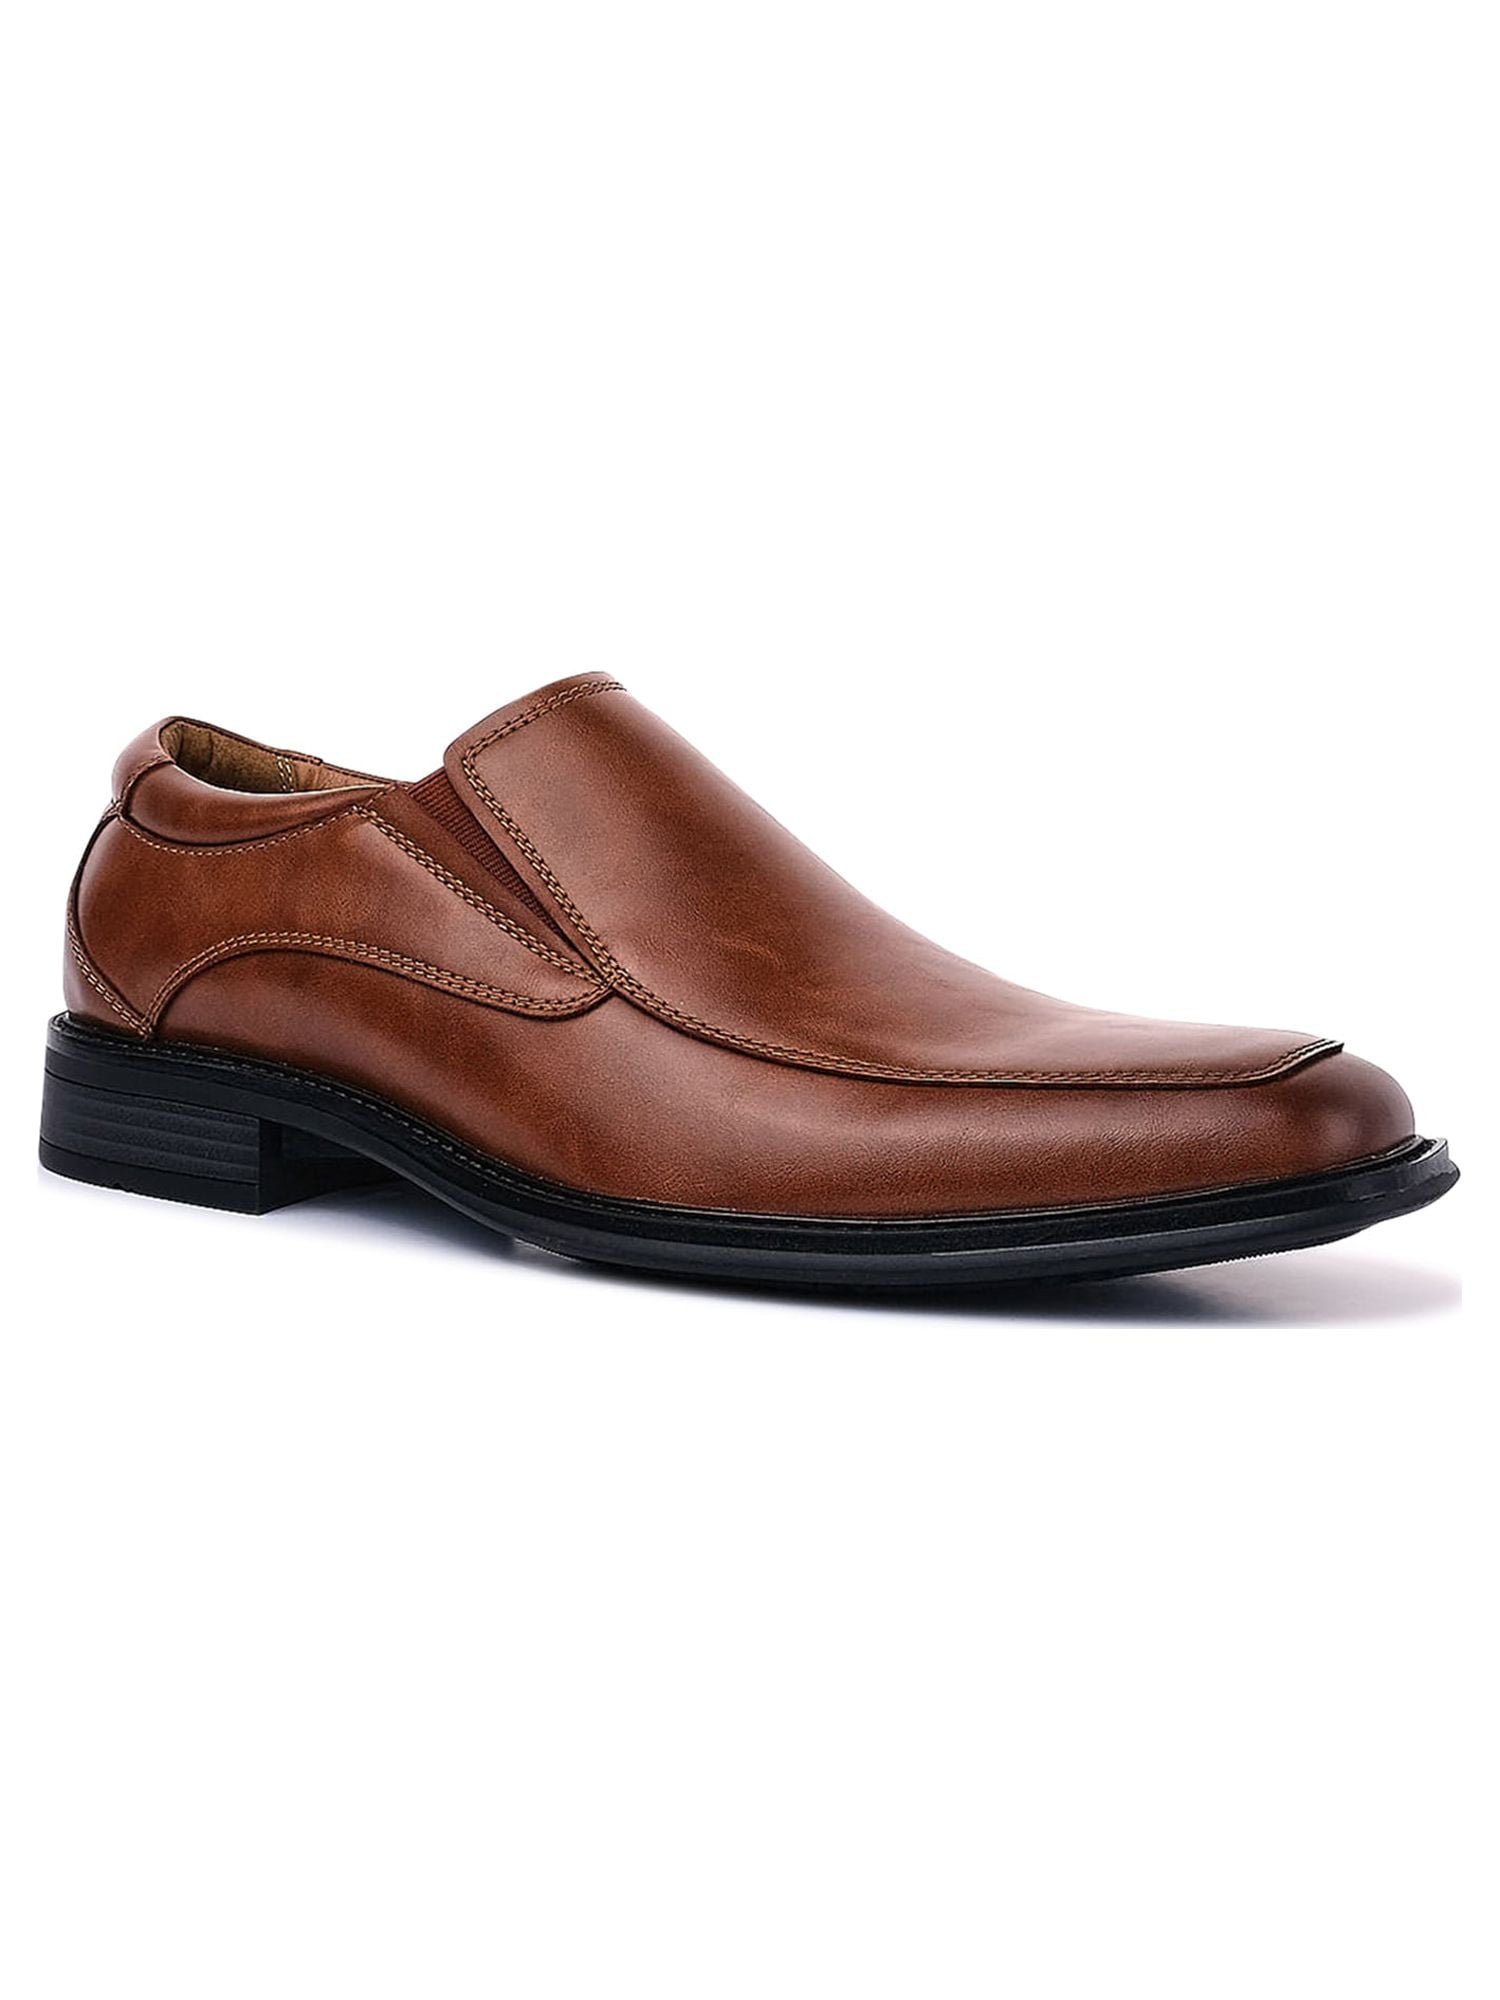 George Men's Dominic Loafer Casual Dress Shoes - Walmart.com